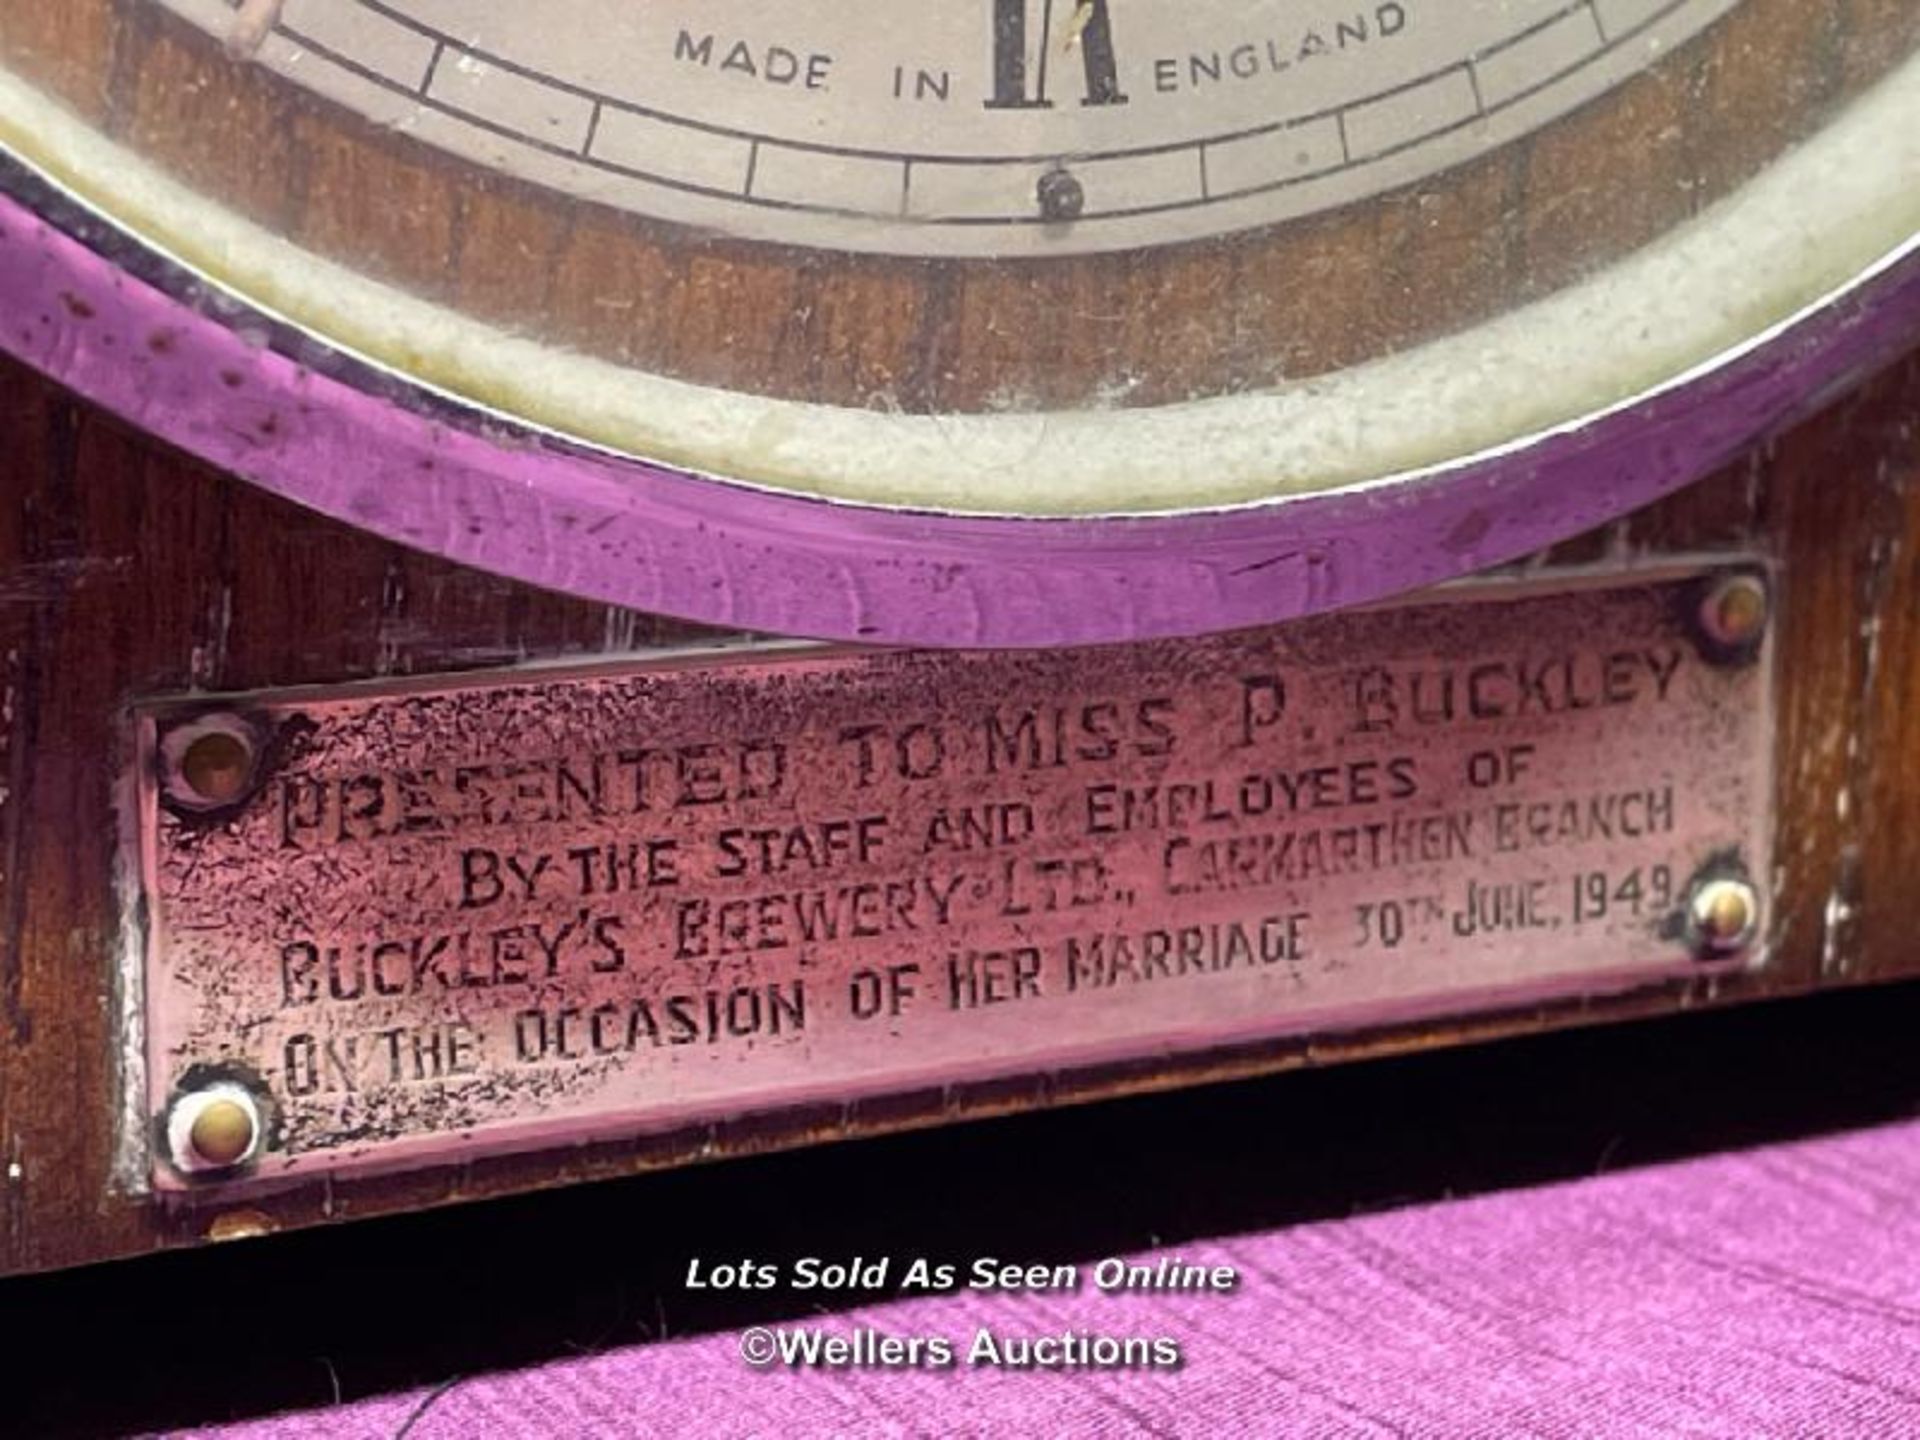 SMITHS FENFIELD PRESENTATION CLOCK, INSCRIBED PRESENTED TO MISS P BUCKLEY BY THE STAFF AND EMPLOYEES - Image 2 of 7